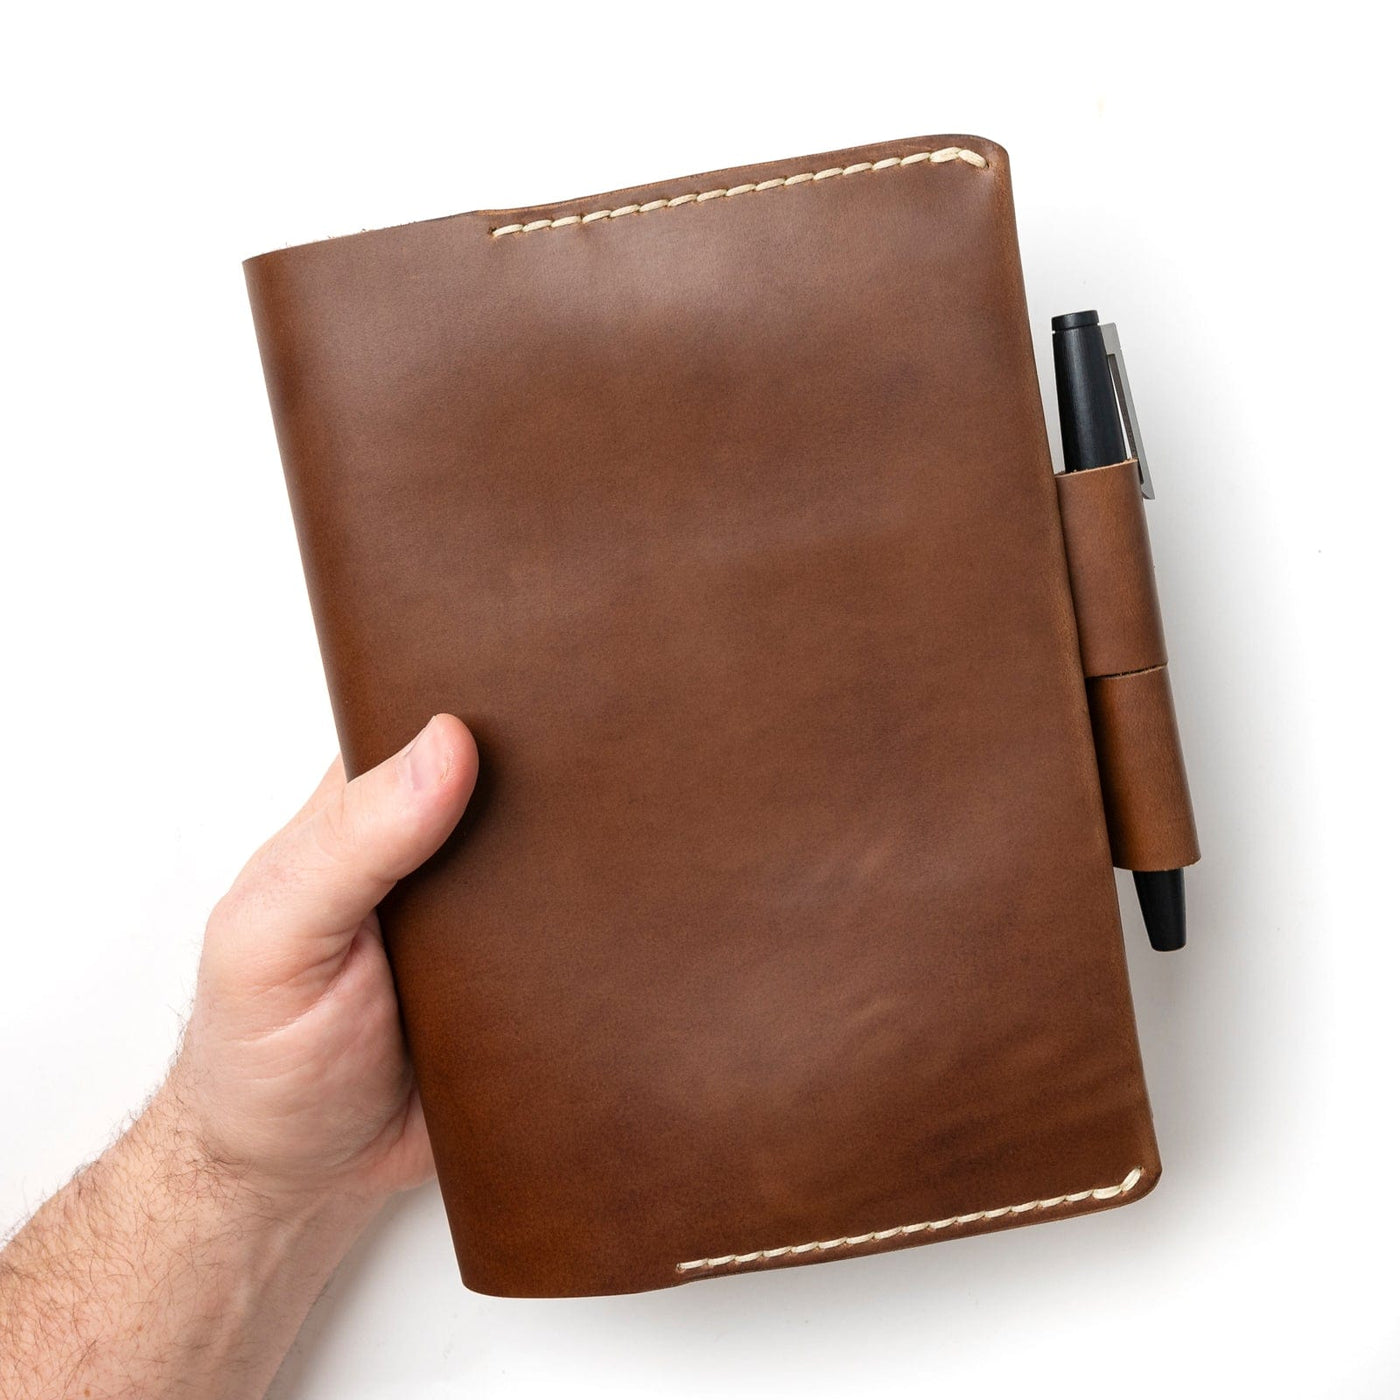 Leather A5 Notebook Cover - Natural Popov Leather